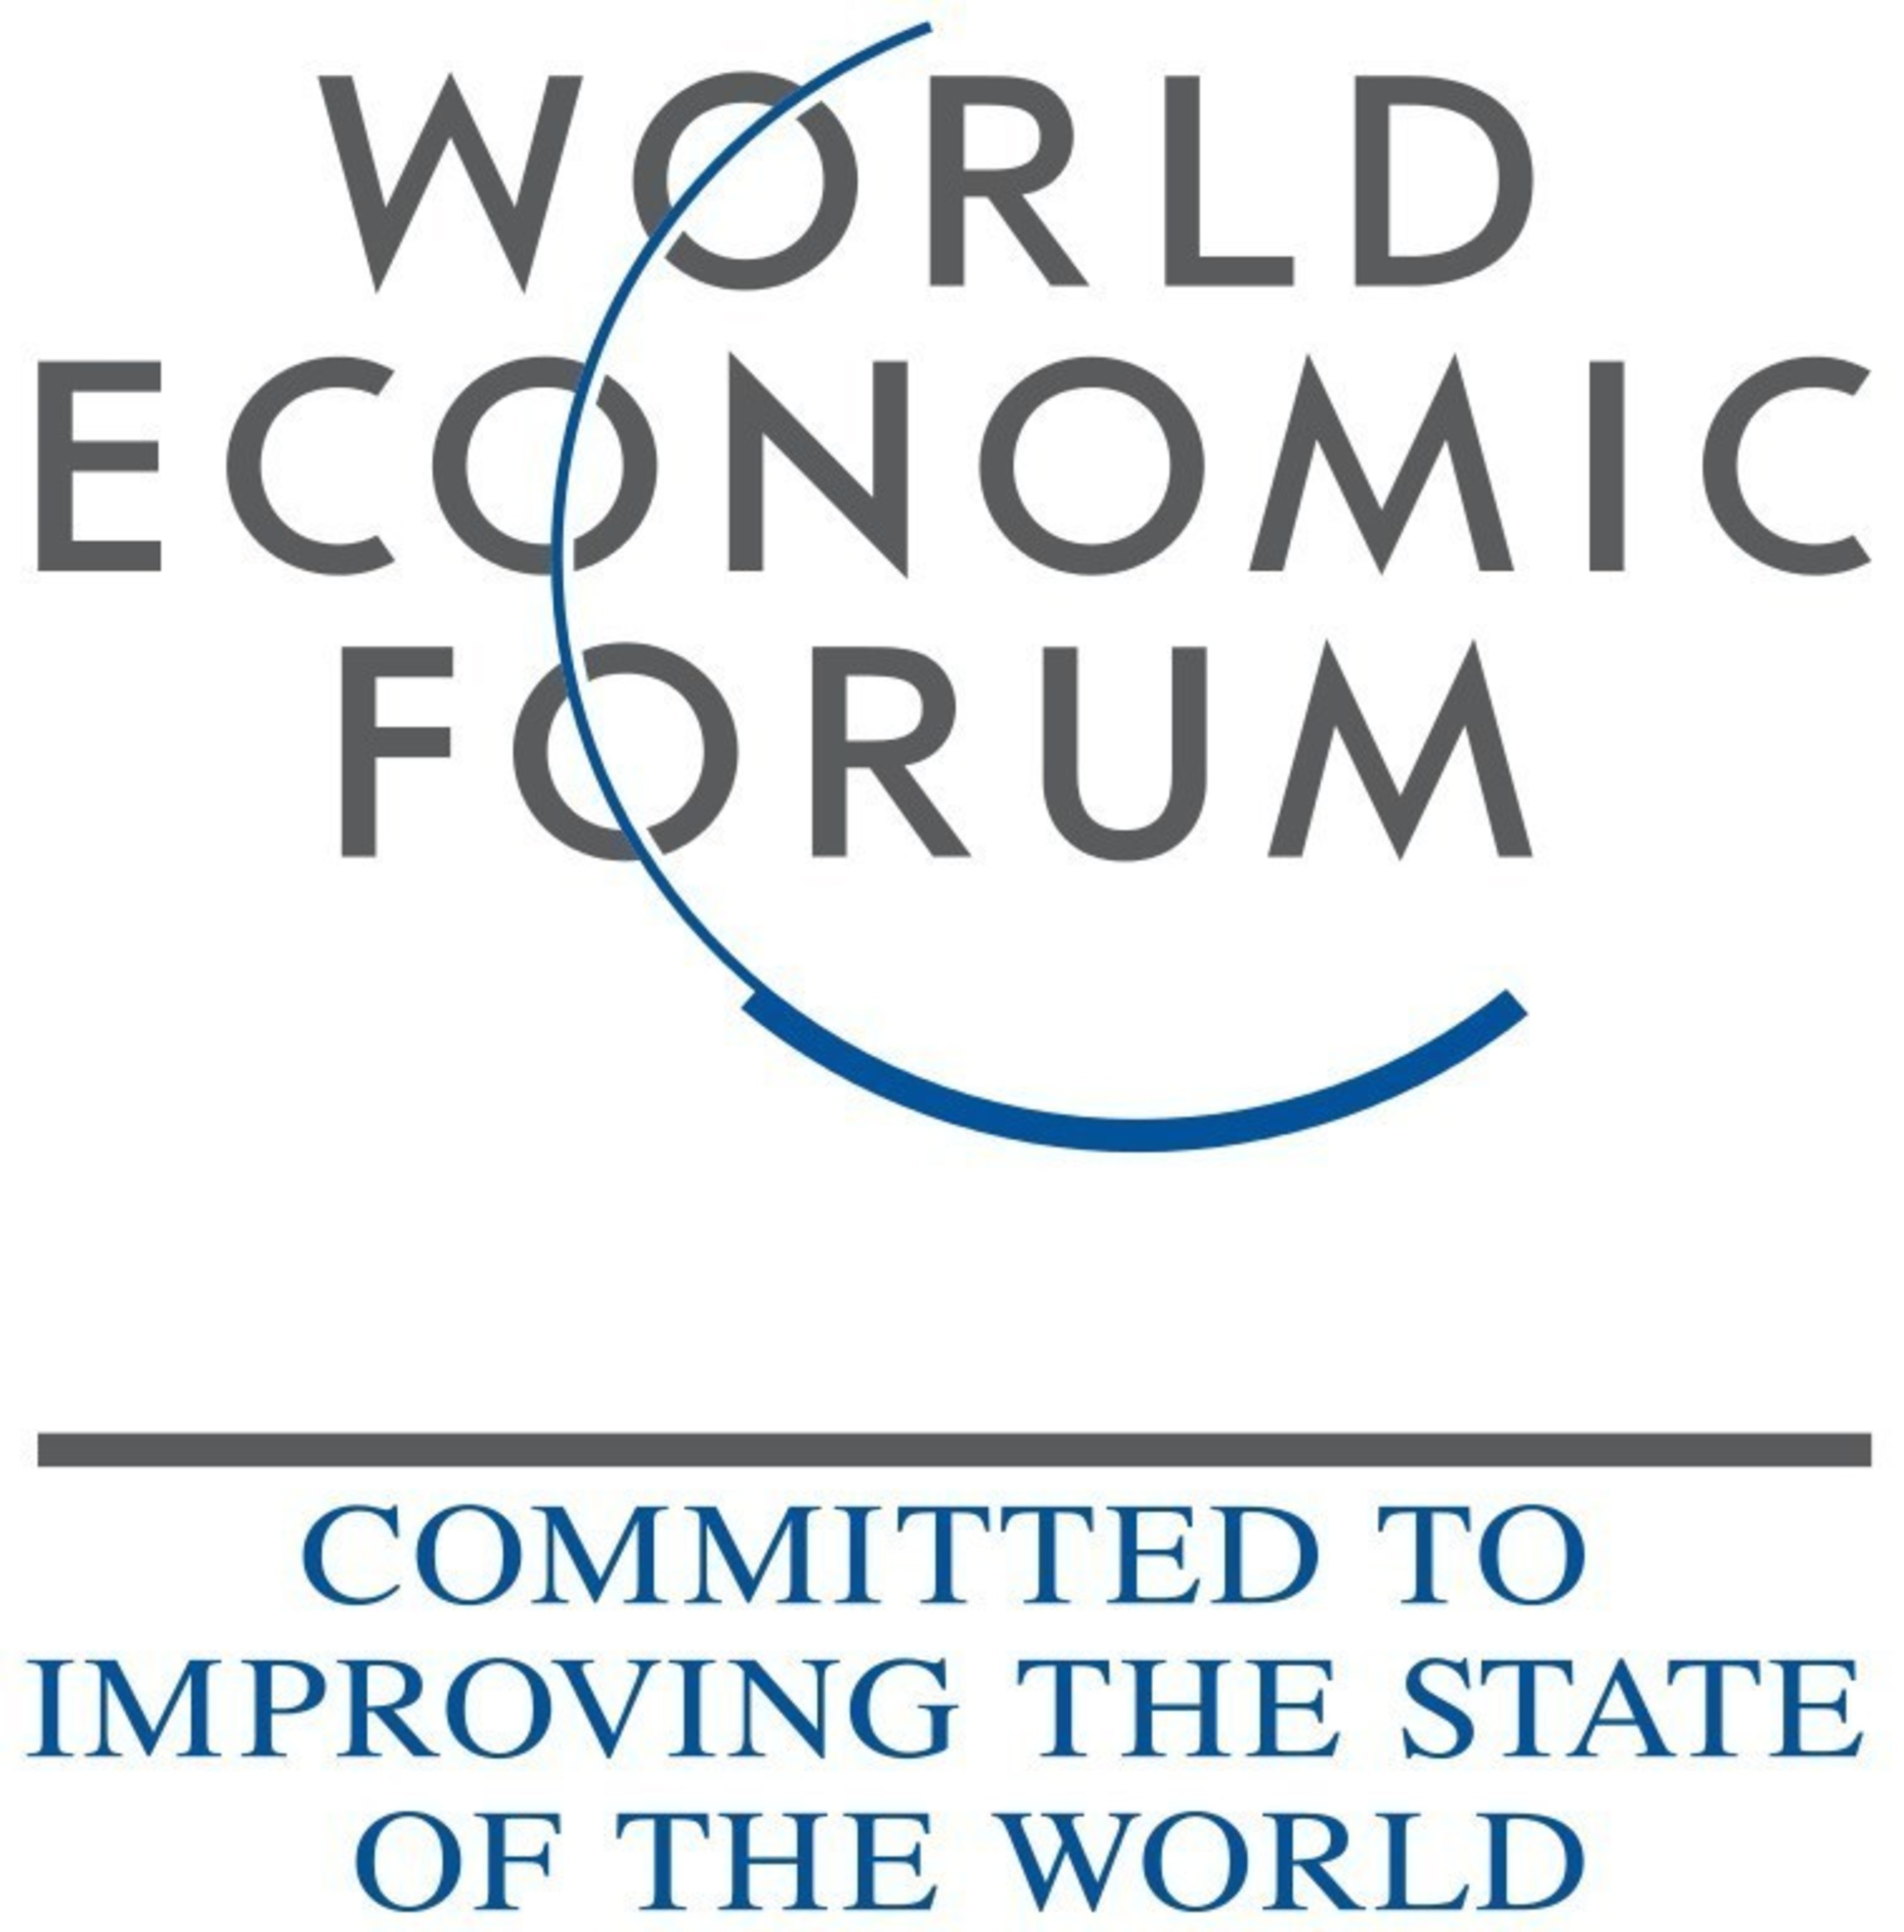 Official Logo of the World Economic Forum, courtesy of Wikipedia.